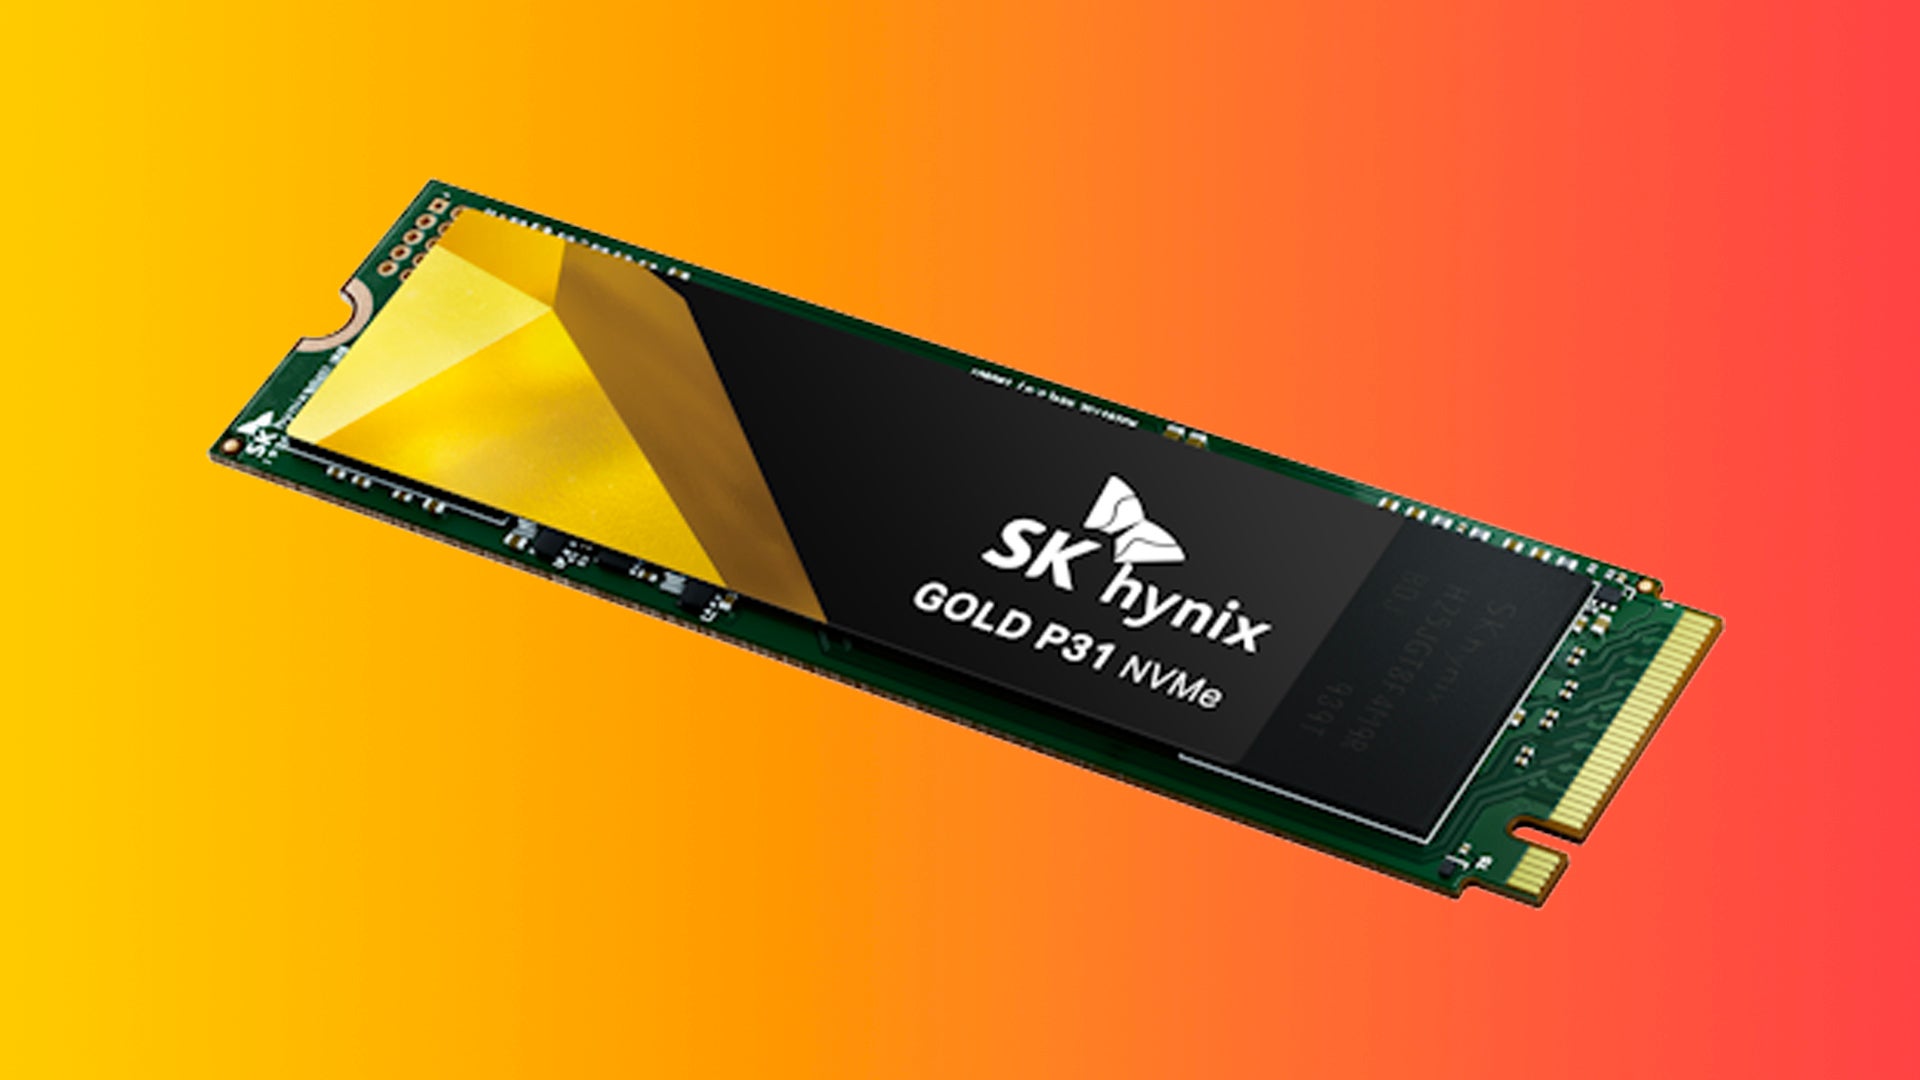 Grab this solid SK Hynix Gold P31 1TB SSD from Amazon for $80 